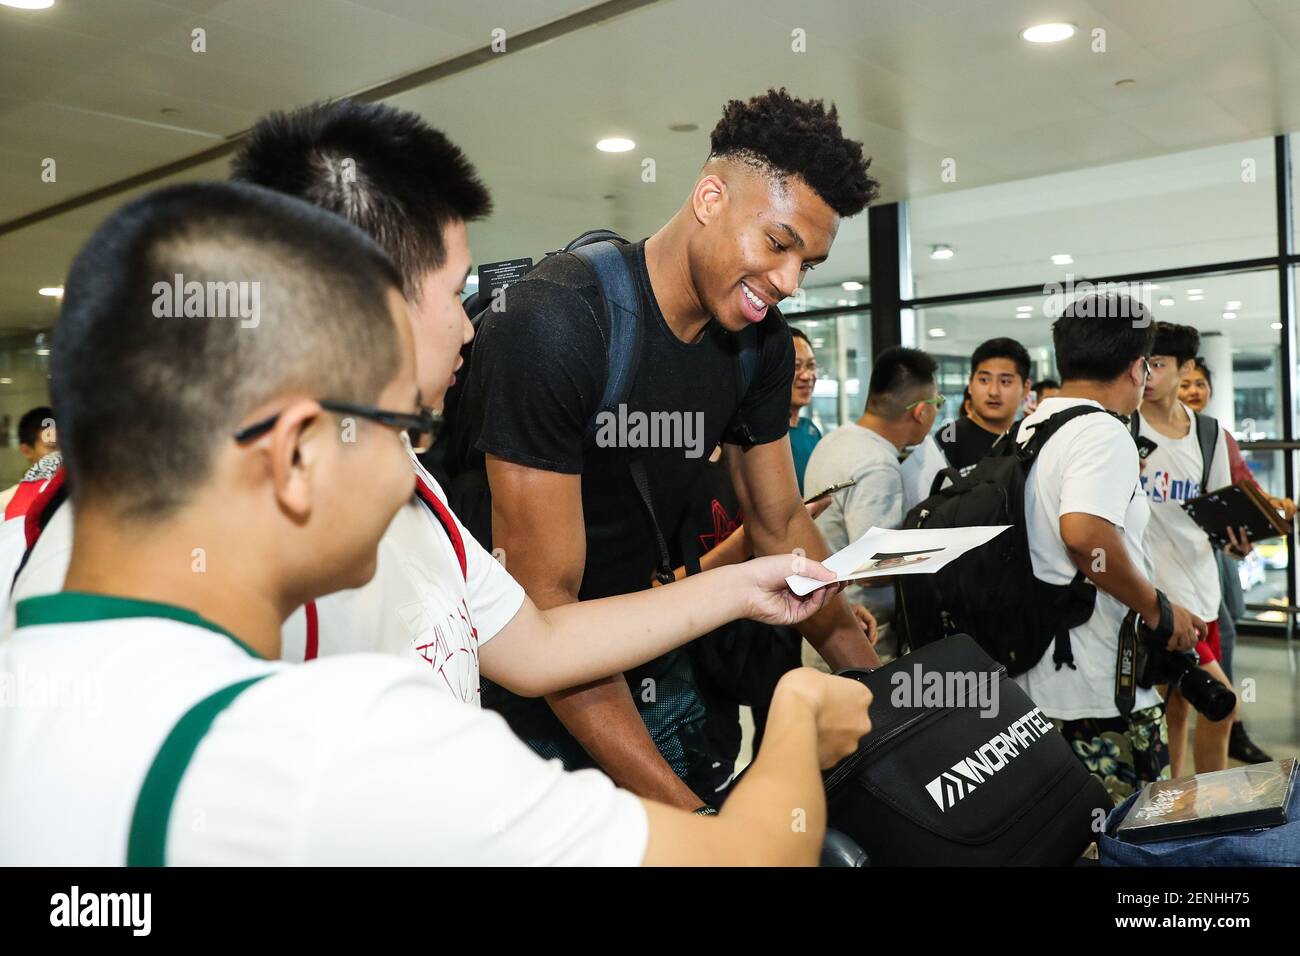 Giannis Antetokounmpo of Greece national basketball team arrives at the ...